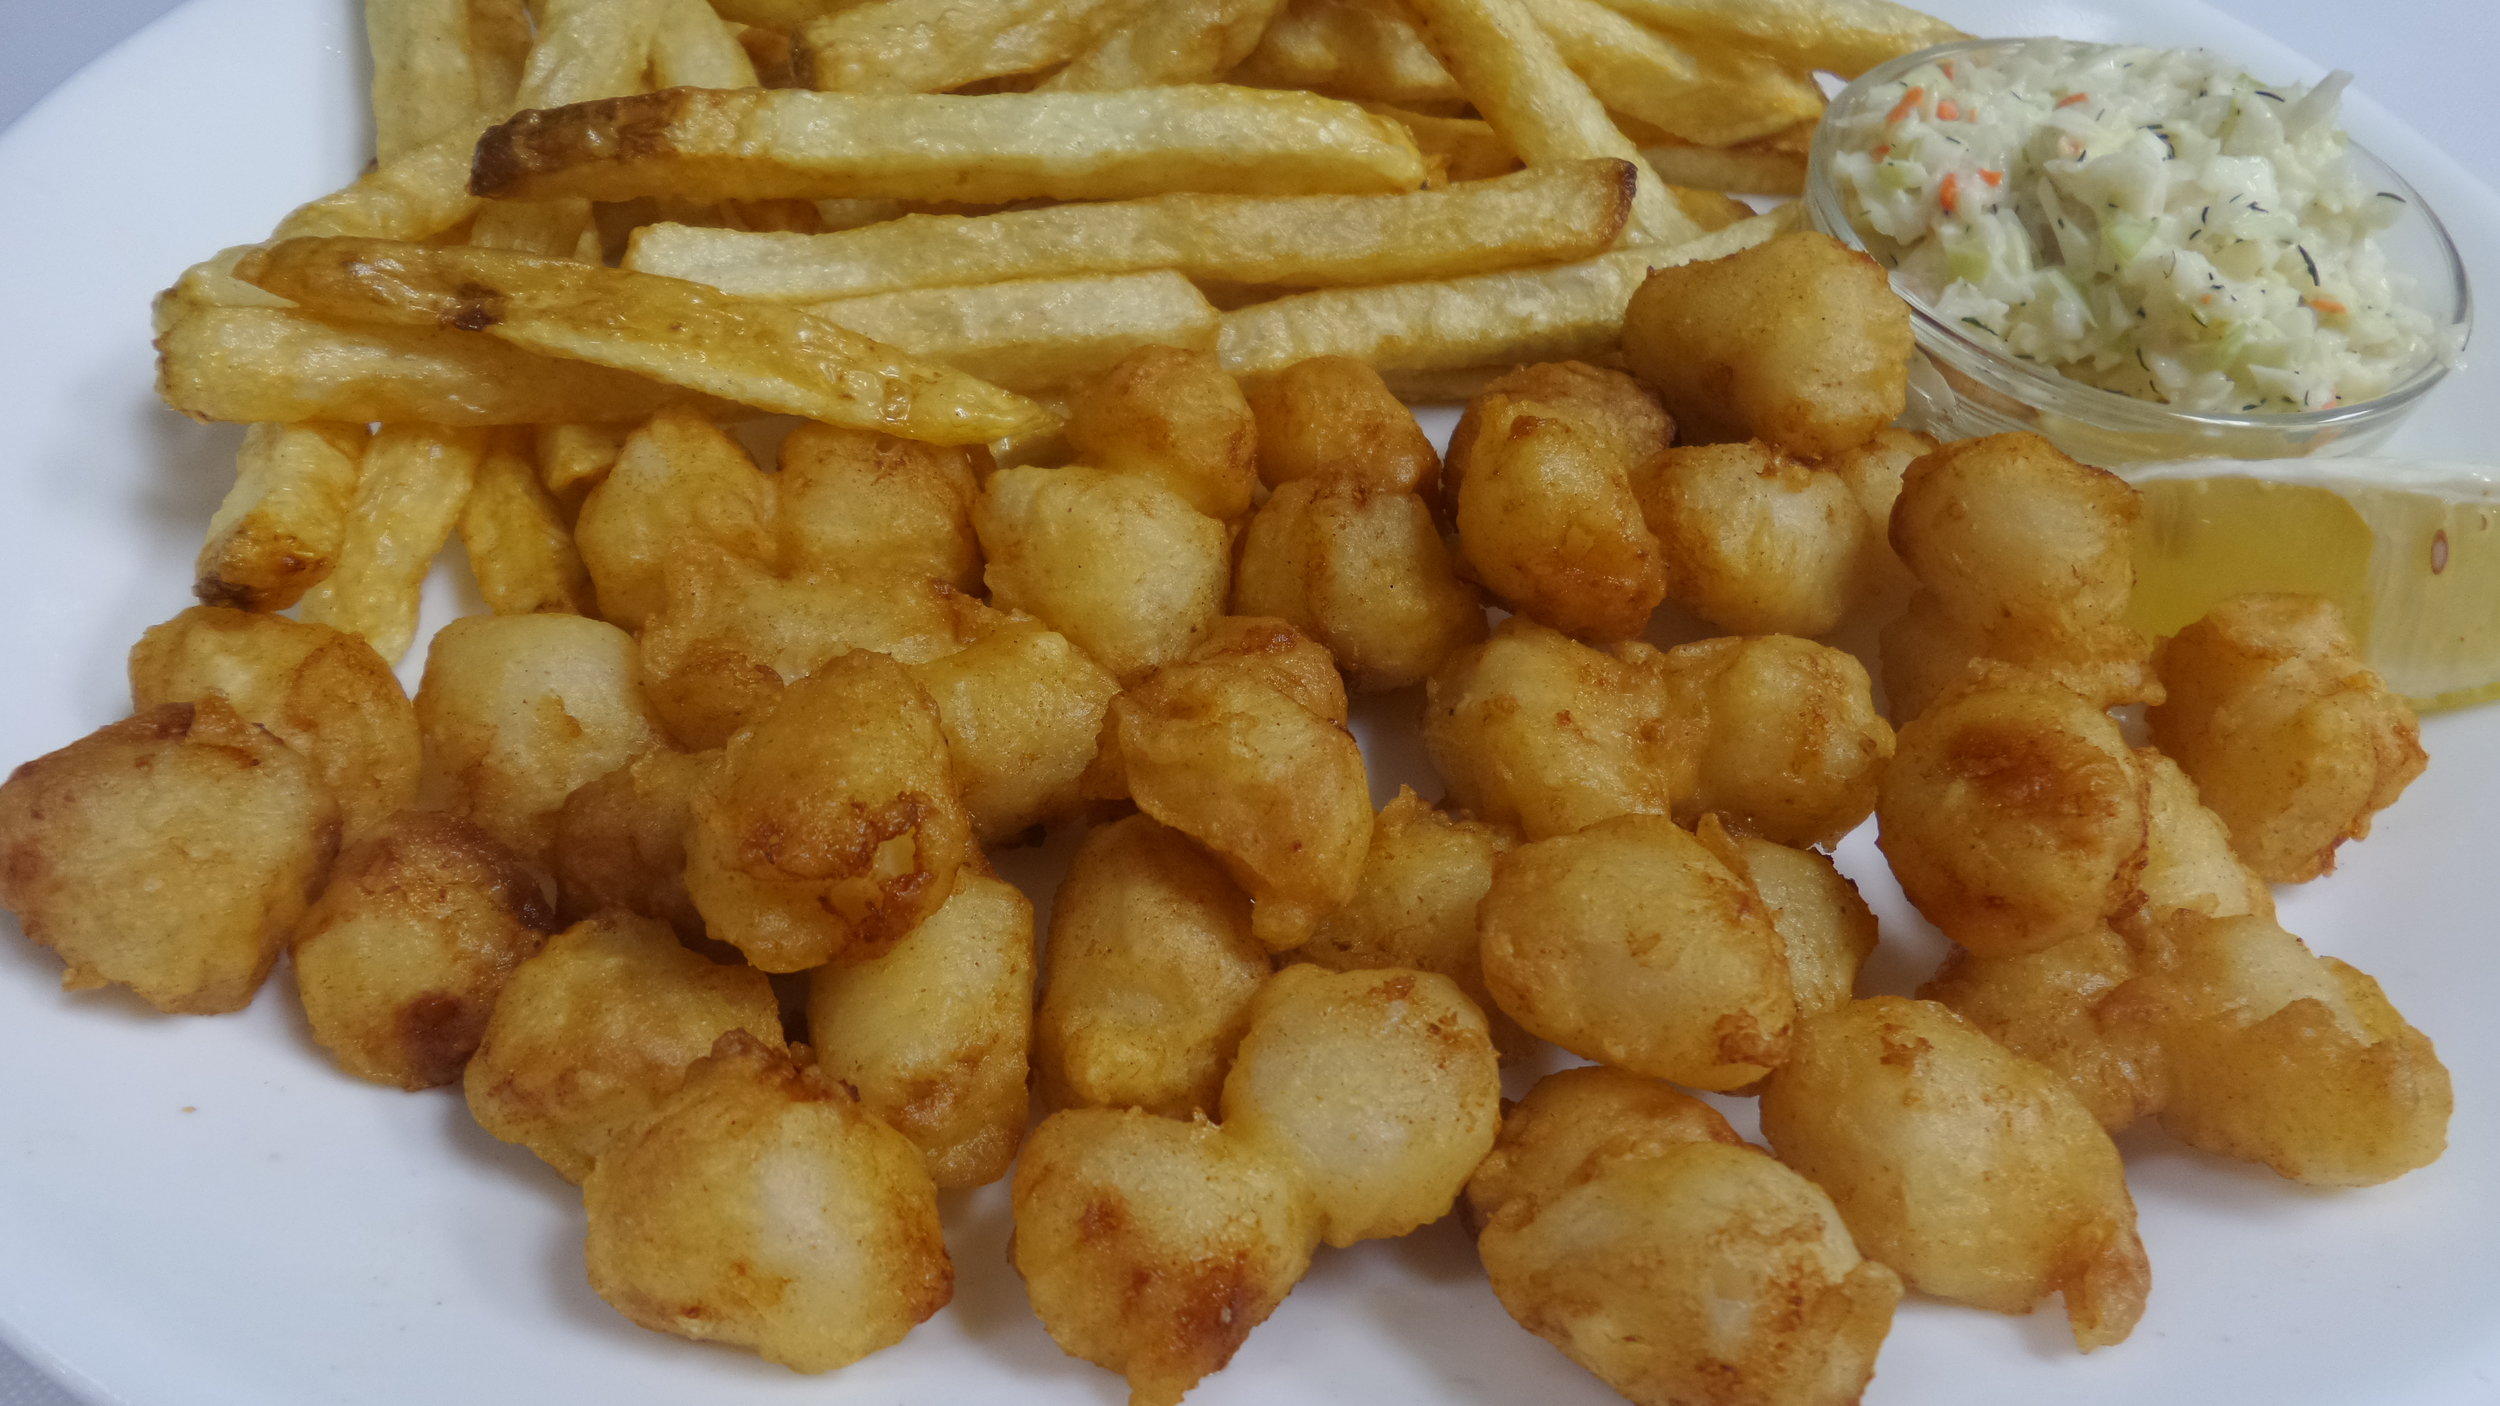 1/2 lb Bay Scallops and Chips